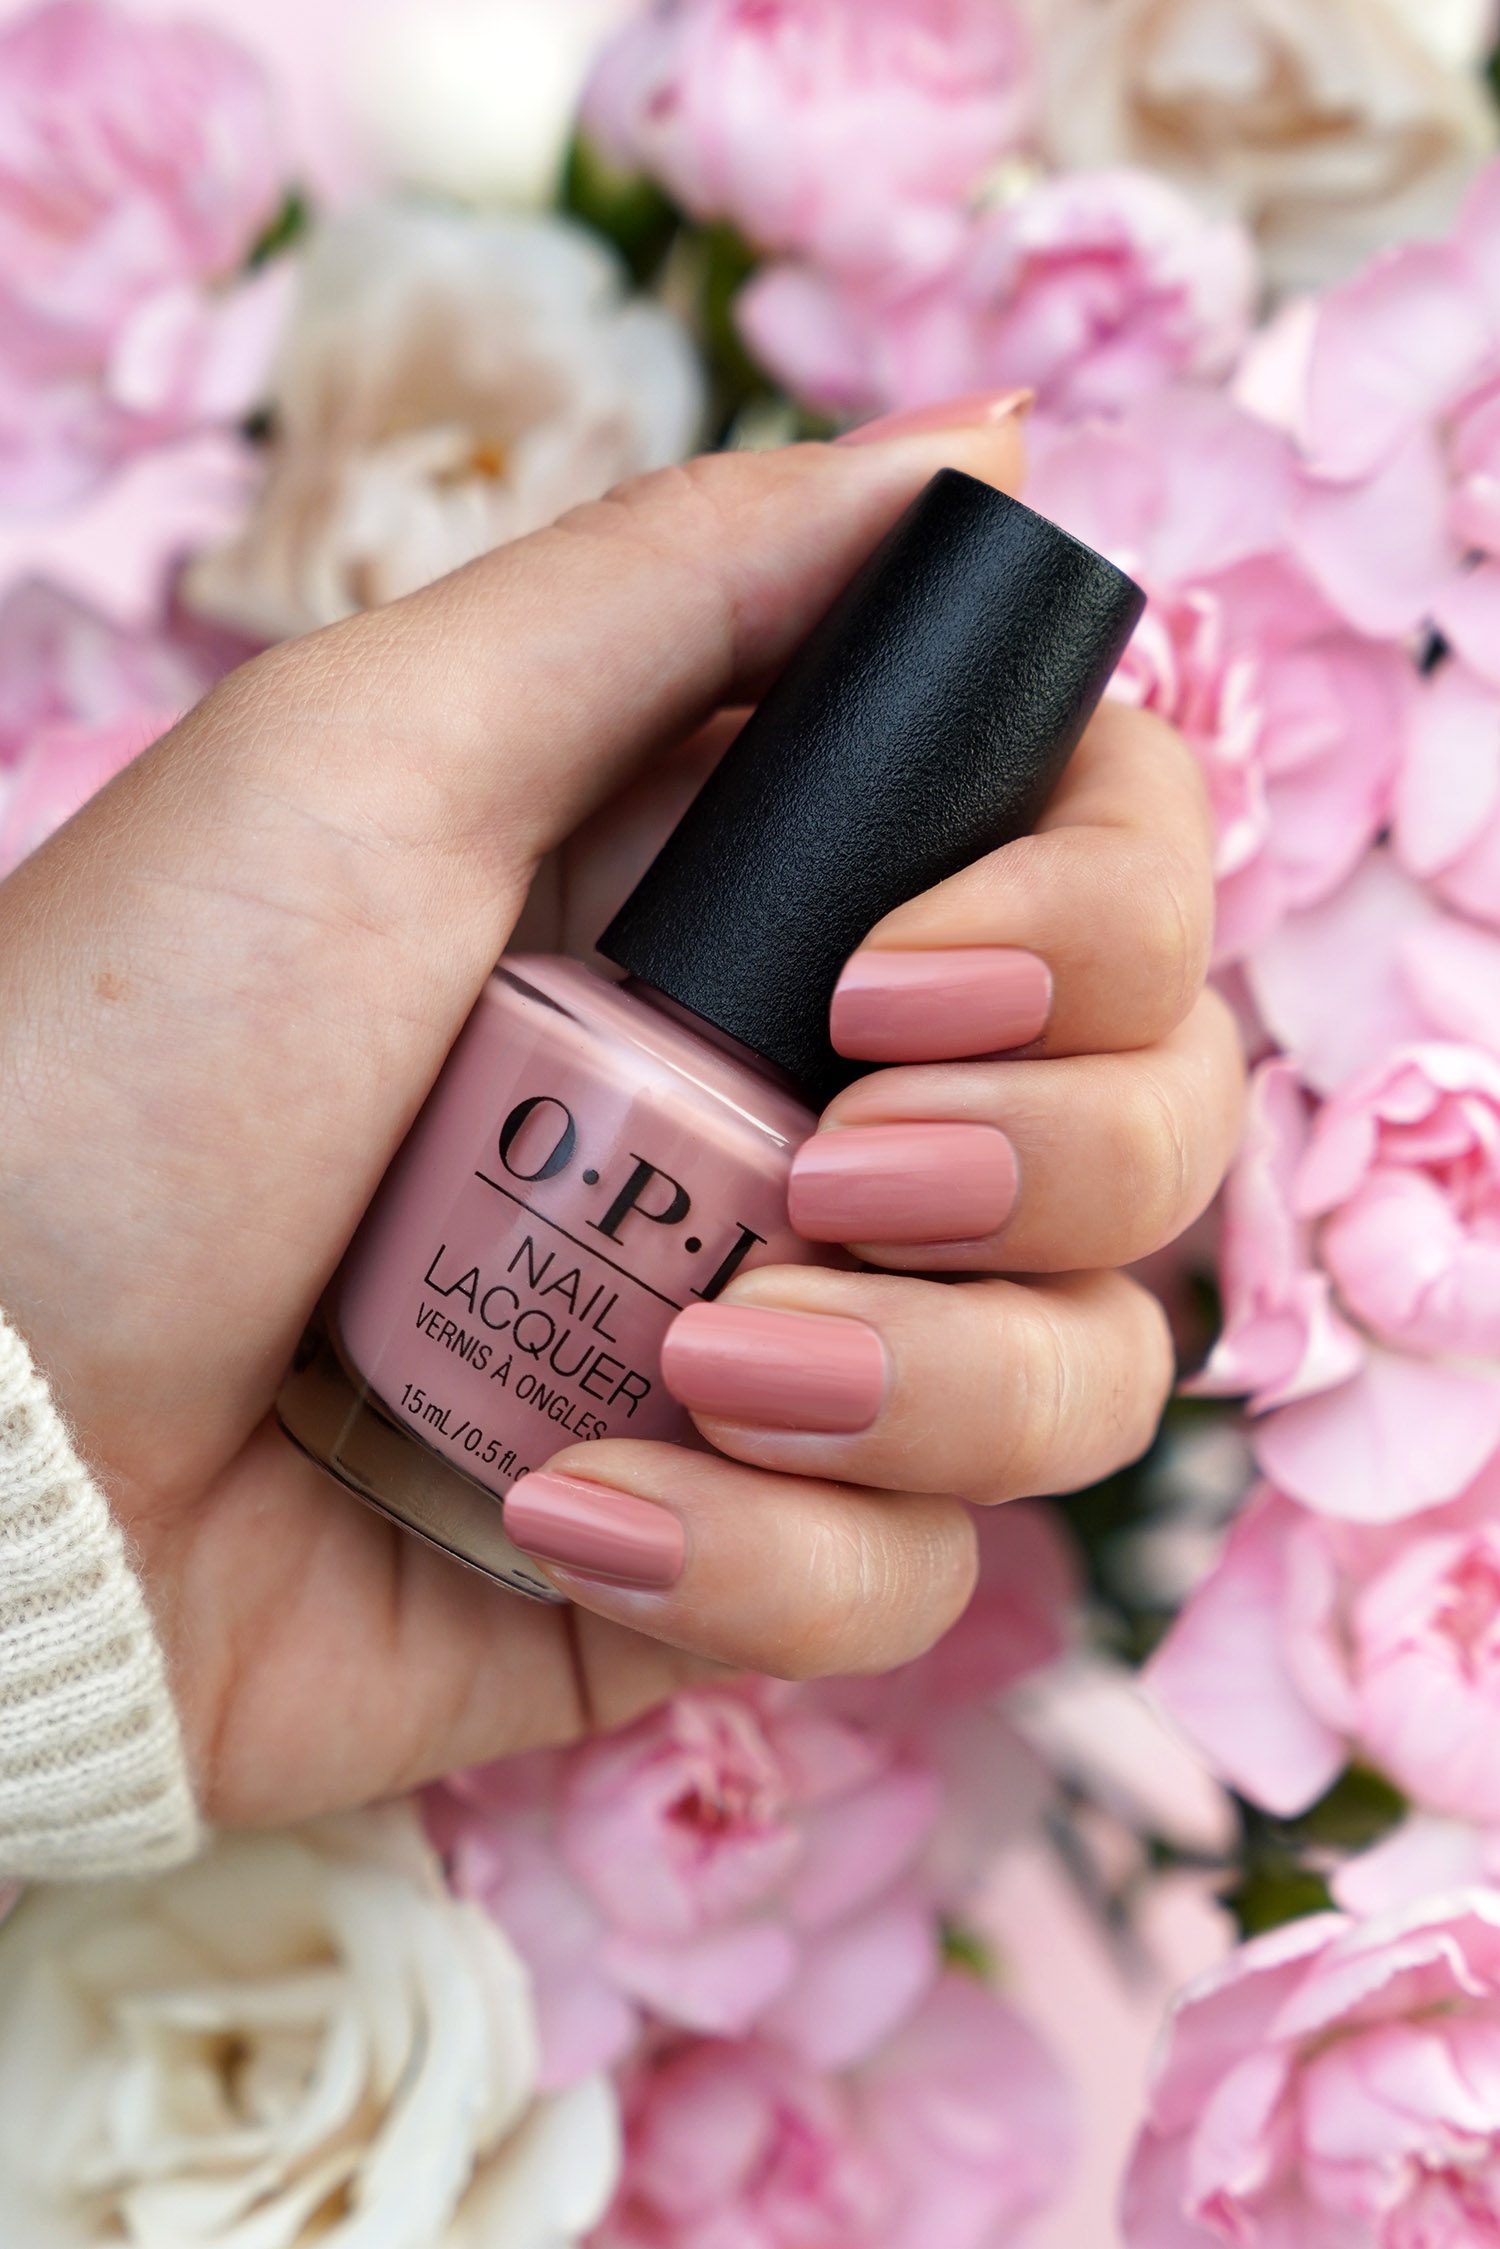 Terugspoelen Smaak sap Pink + Red Nail Polishes To Try for Valentine's Day - The Beauty Look Book